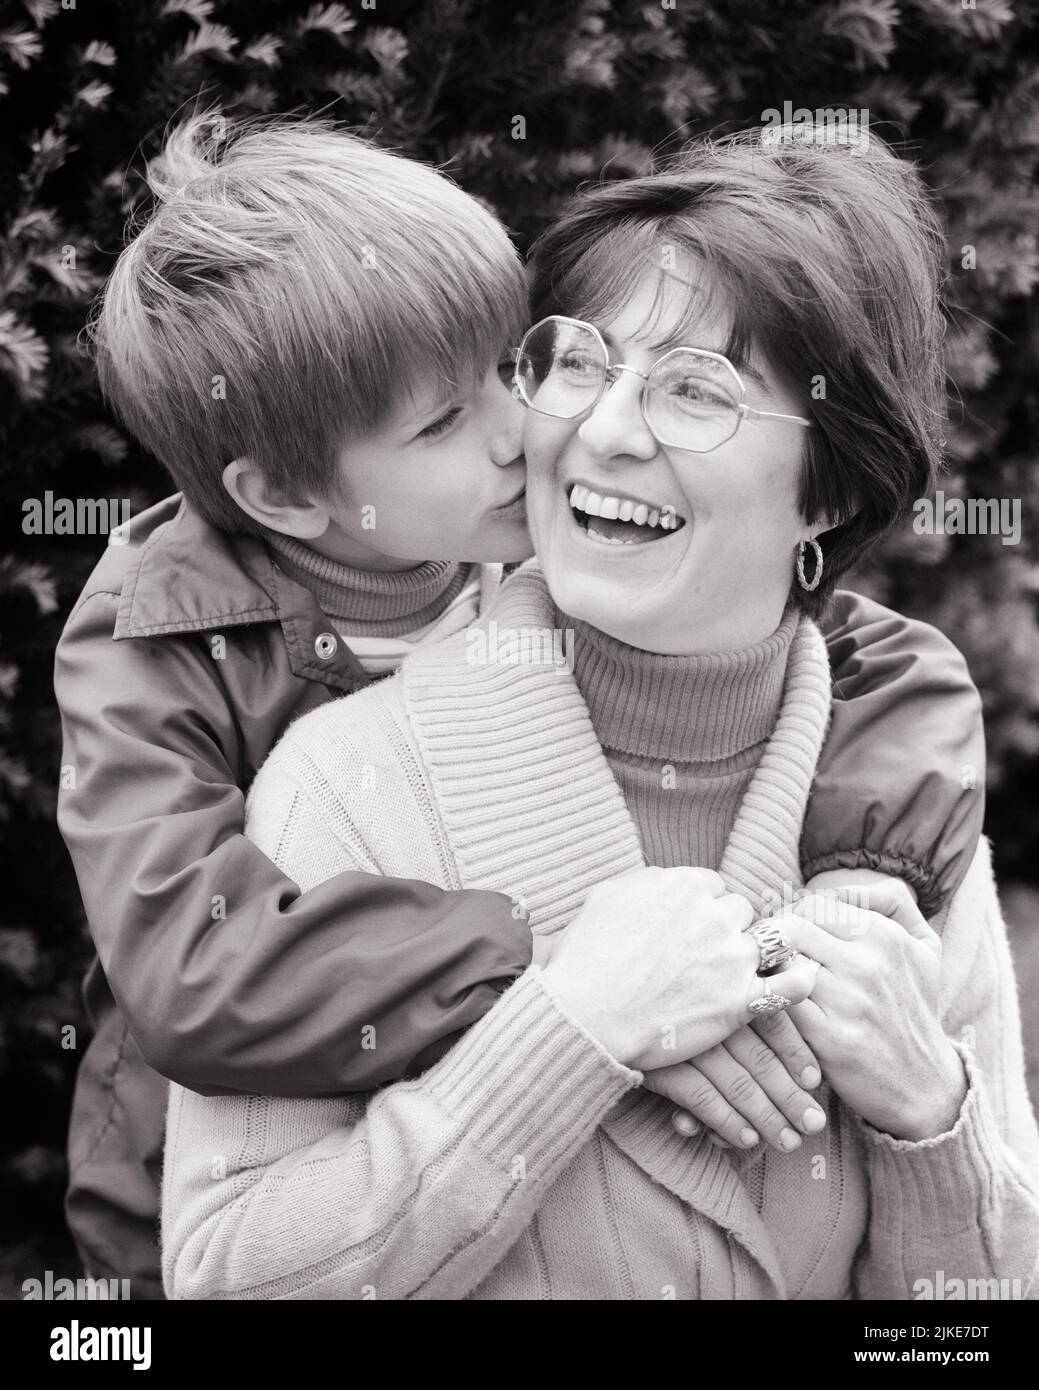 1970s LITTLE BOY HUGGING HIS MOTHER FROM BEHIND ARMS AROUND HER KISSING HER ON THE CHEEK MOM HOLDING HIS HAND LAUGHING - j14221 HAR001 HARS EXPRESSION OLD TIME SURPRISE NOSTALGIA HUGGING OLD FASHION 1 JUVENILE FACIAL LAUGH EMBRACE NECK STRONG SONS PLEASED FAMILIES JOY LIFESTYLE FEMALES HEALTHINESS HOME LIFE COPY SPACE FRIENDSHIP HALF-LENGTH HUG LADIES PERSONS CARING MALES EMBRACING EXPRESSIONS B&W HAPPINESS CHEERFUL HIS JOYFUL PERSONAL ATTACHMENT AFFECTION EMOTION JUVENILES MID-ADULT MID-ADULT WOMAN MOMS PECK SMOOCH BLACK AND WHITE CAUCASIAN ETHNICITY HAR001 OLD FASHIONED Stock Photo